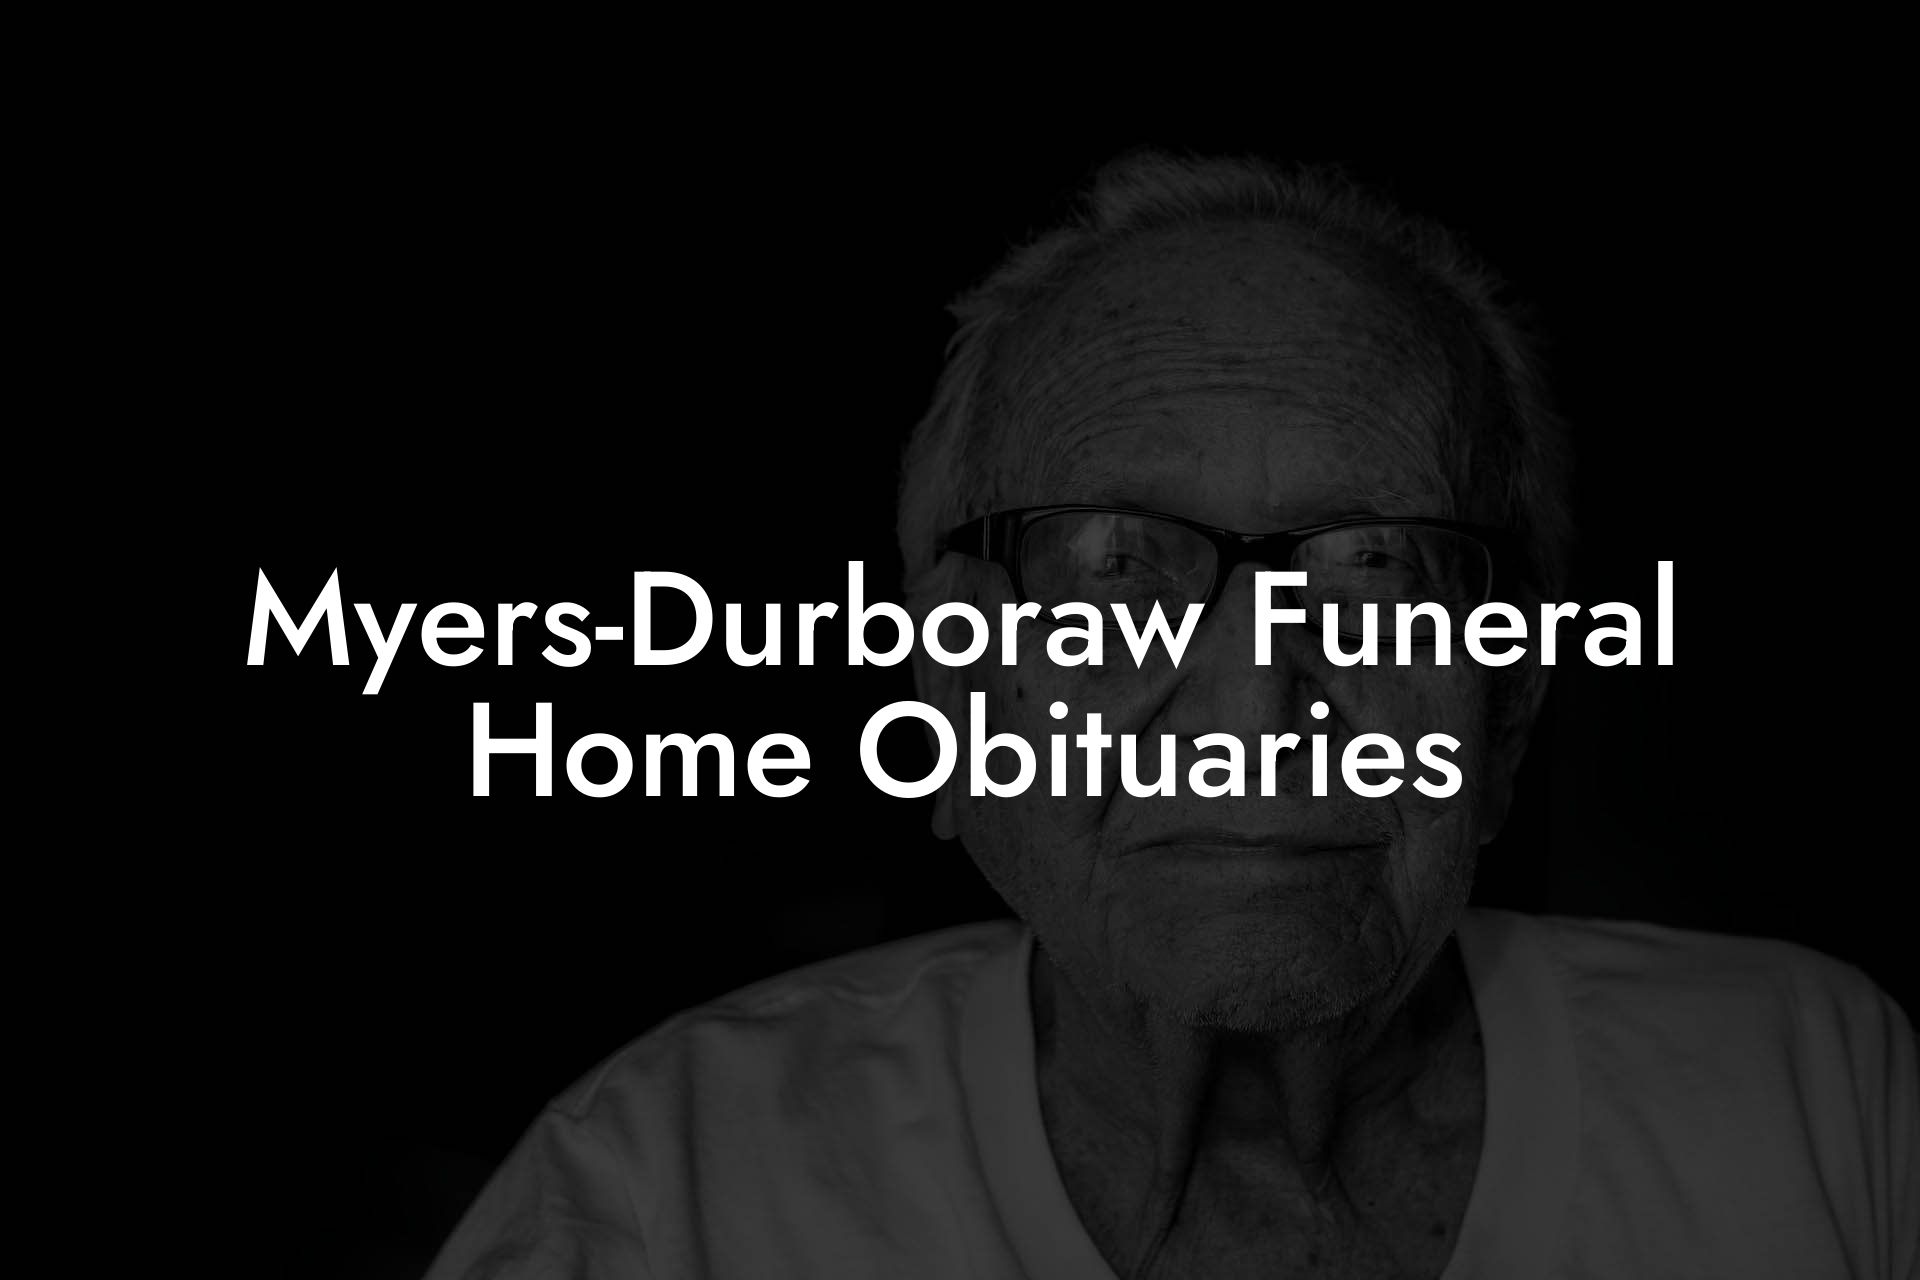 Myers-Durboraw Funeral Home Obituaries